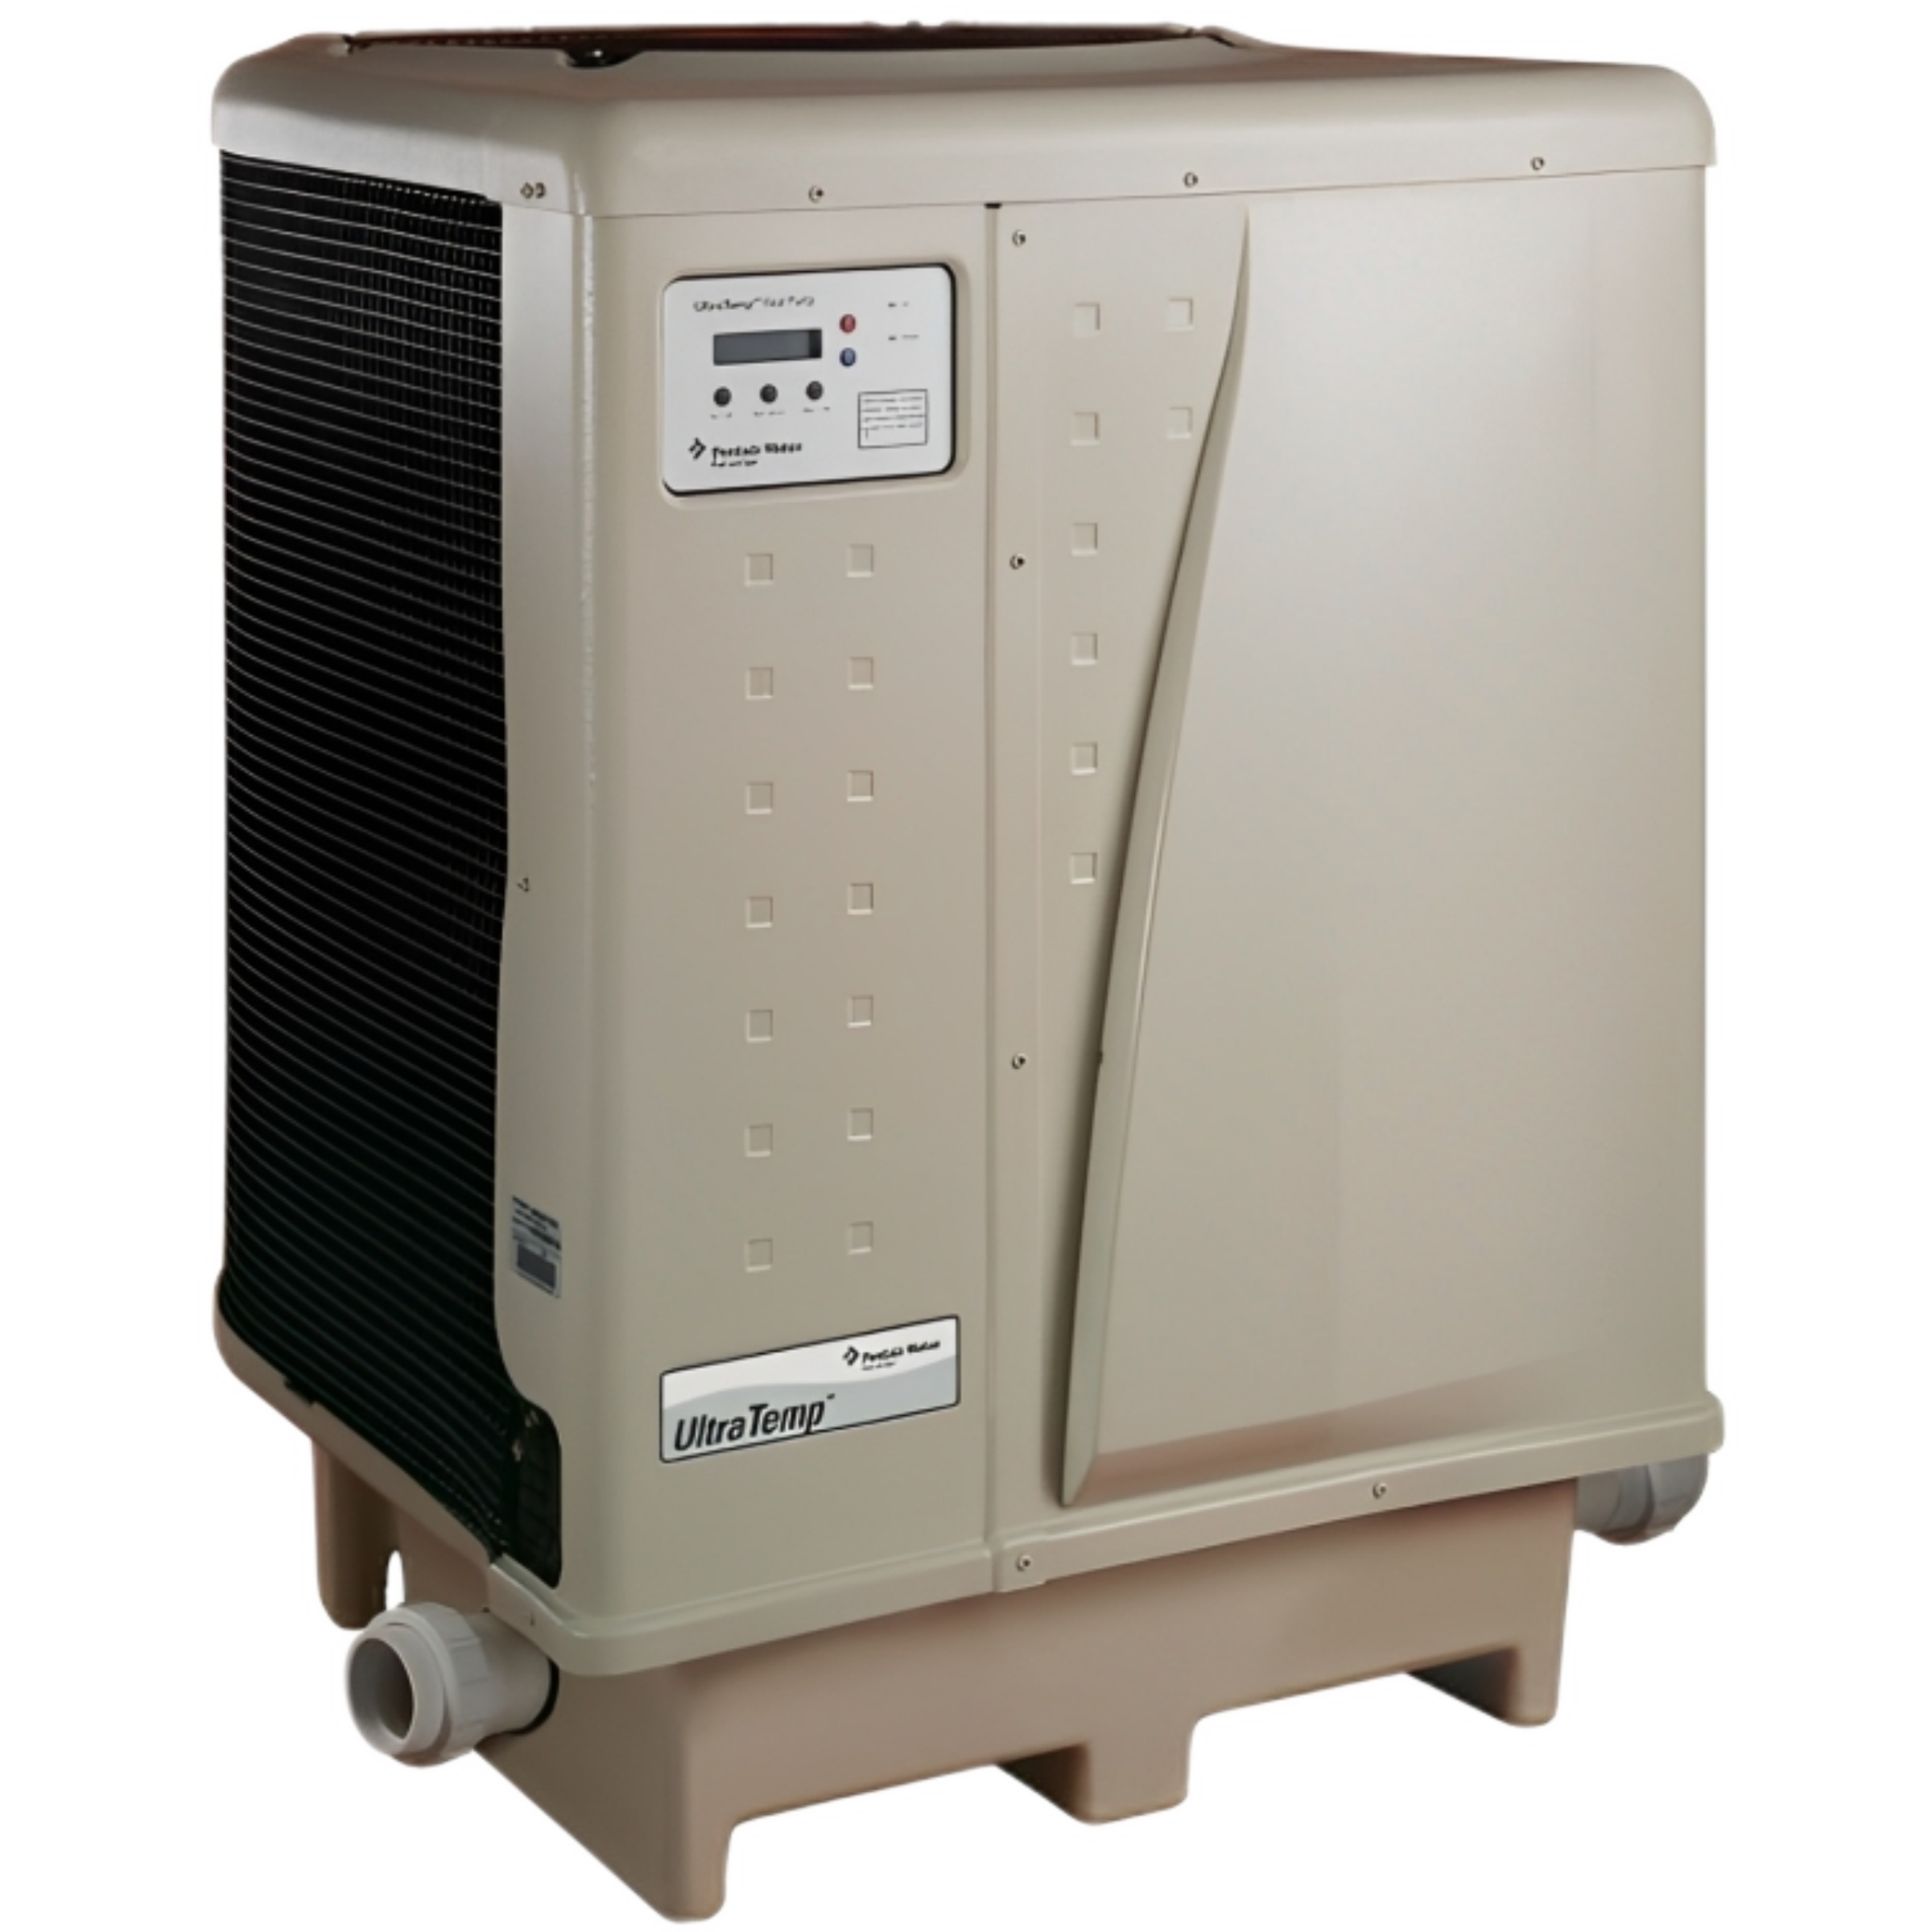 460932 PENTAIR UltraTemp 110 High Performance Pool Heat Pump, Color: Almond, 
SIMPLY THE MOST ECONOMICAL WAY TO HEAT POOLS AND SPAS